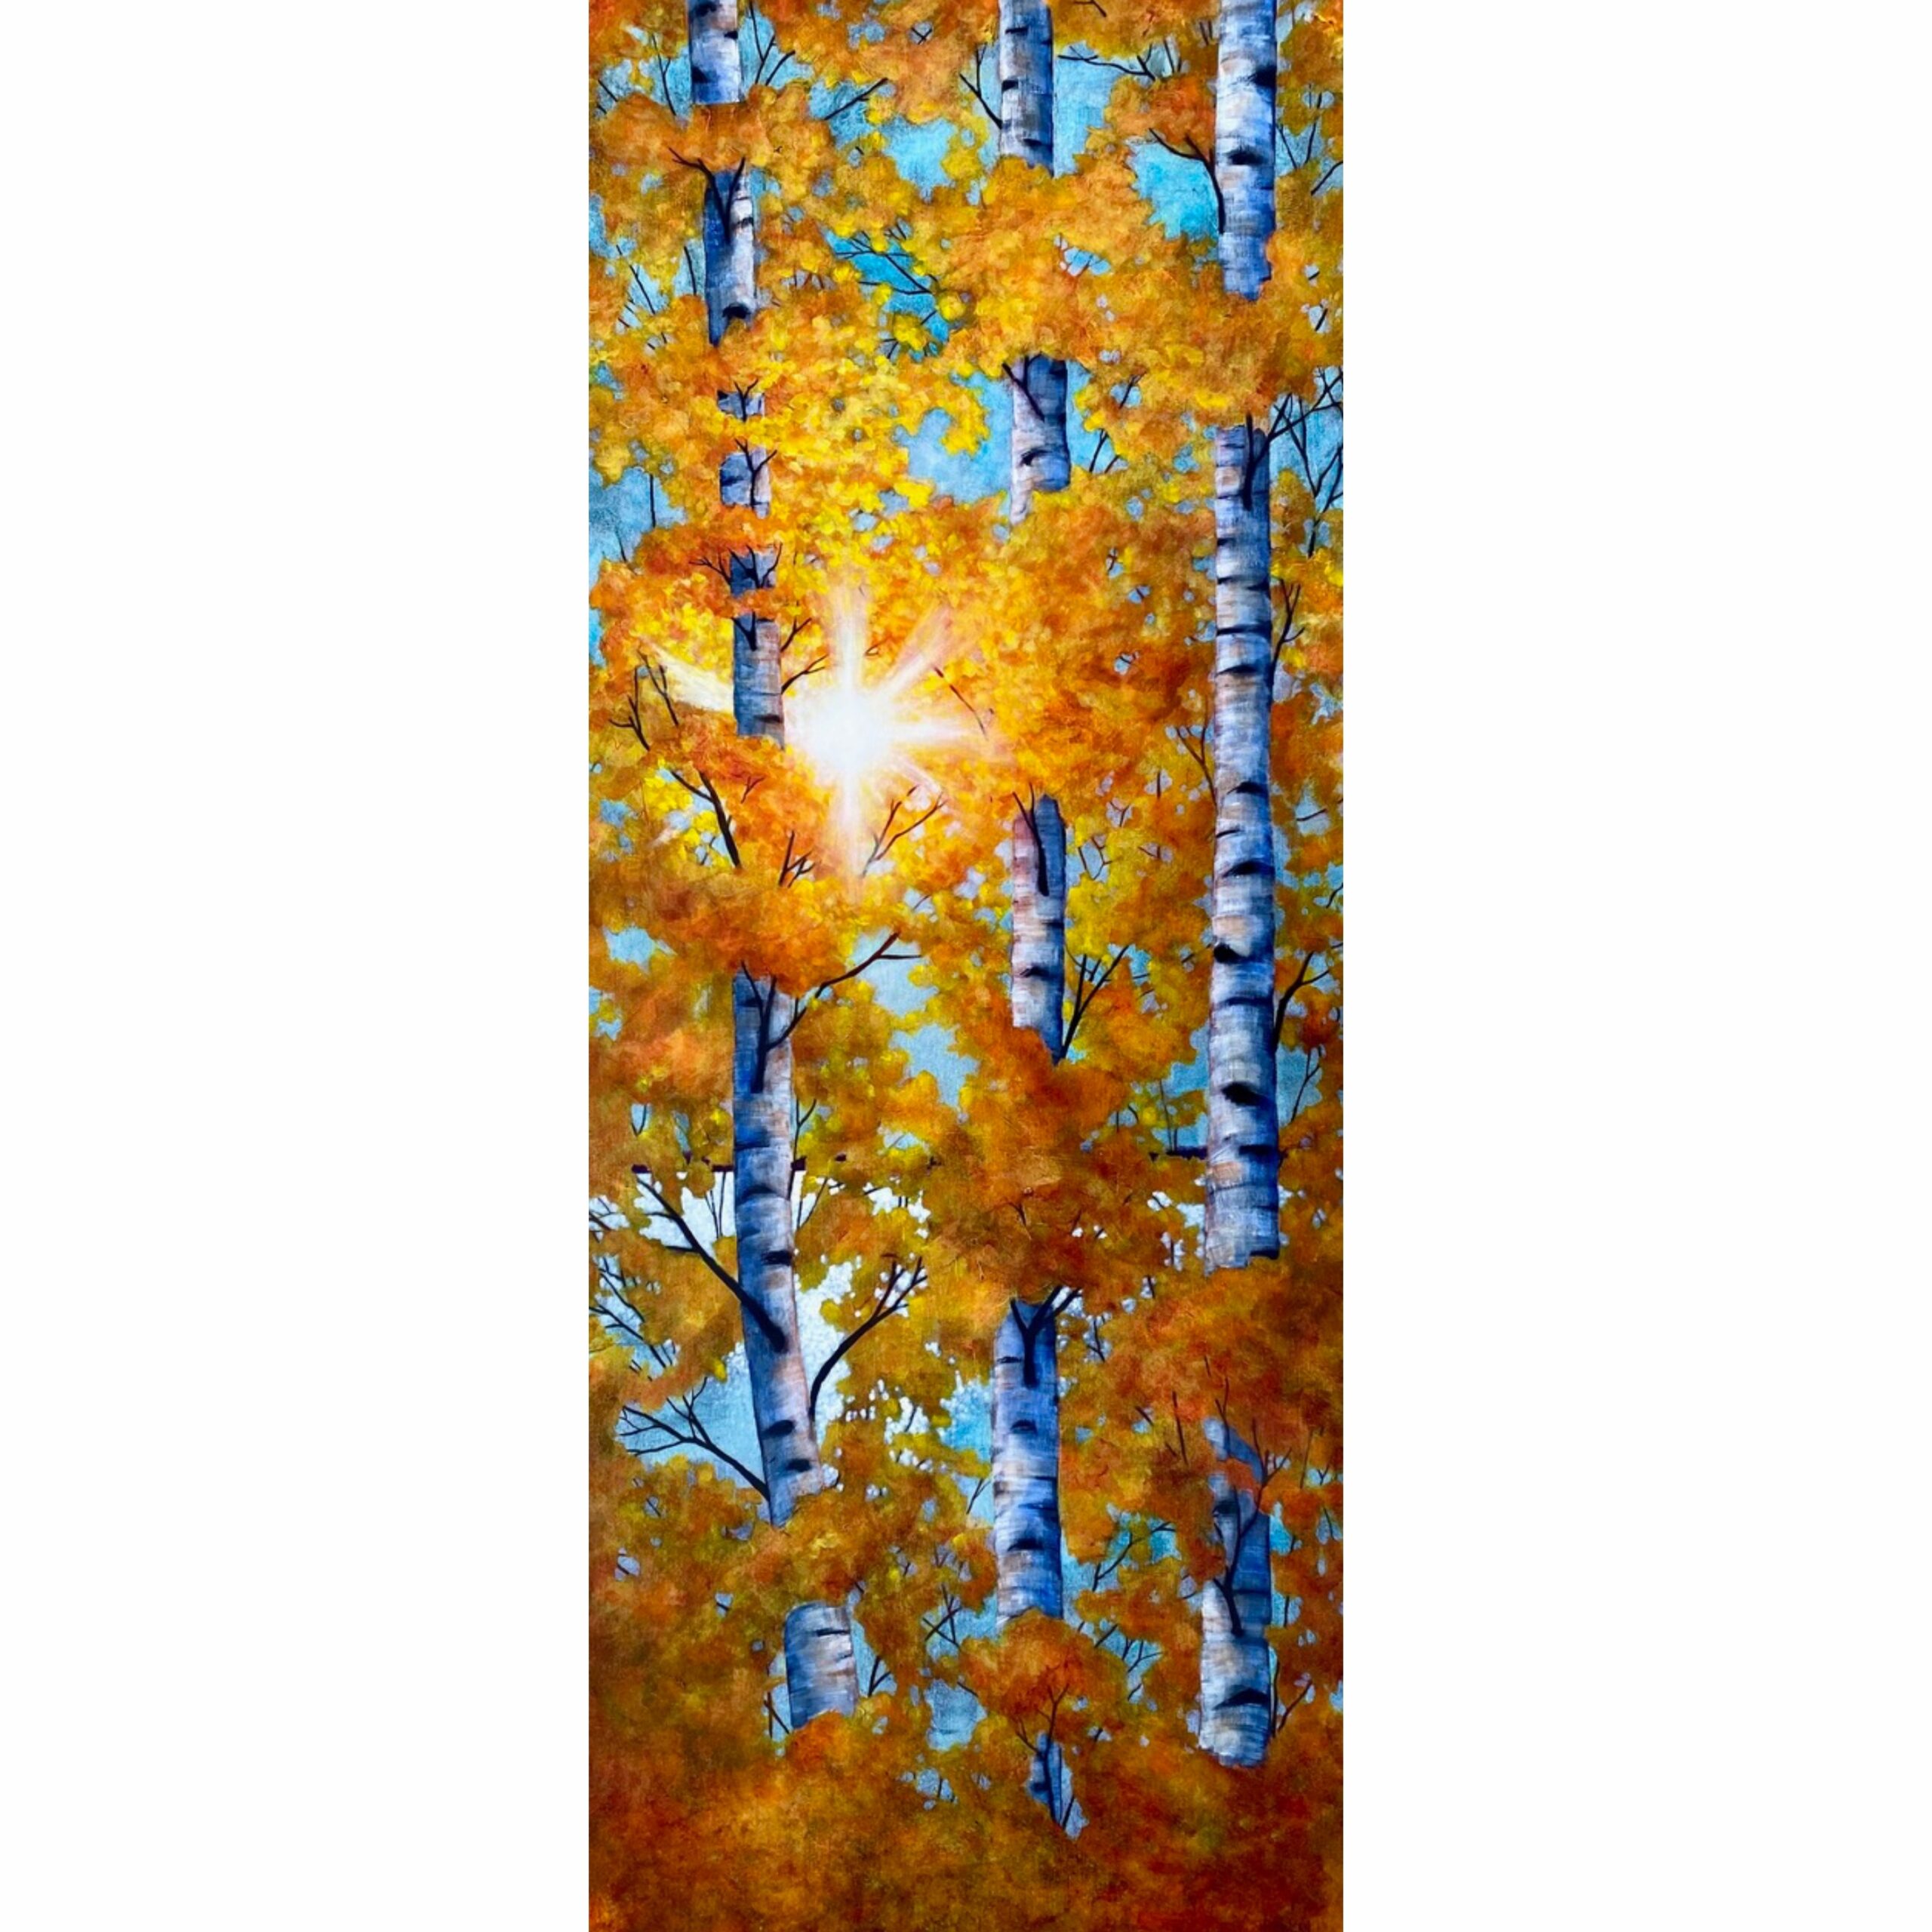 Autumn's Last Stand, original acrylic golden autumn tree painting by Melissa Jean at Effusion Art Gallery in Invermere, BC.